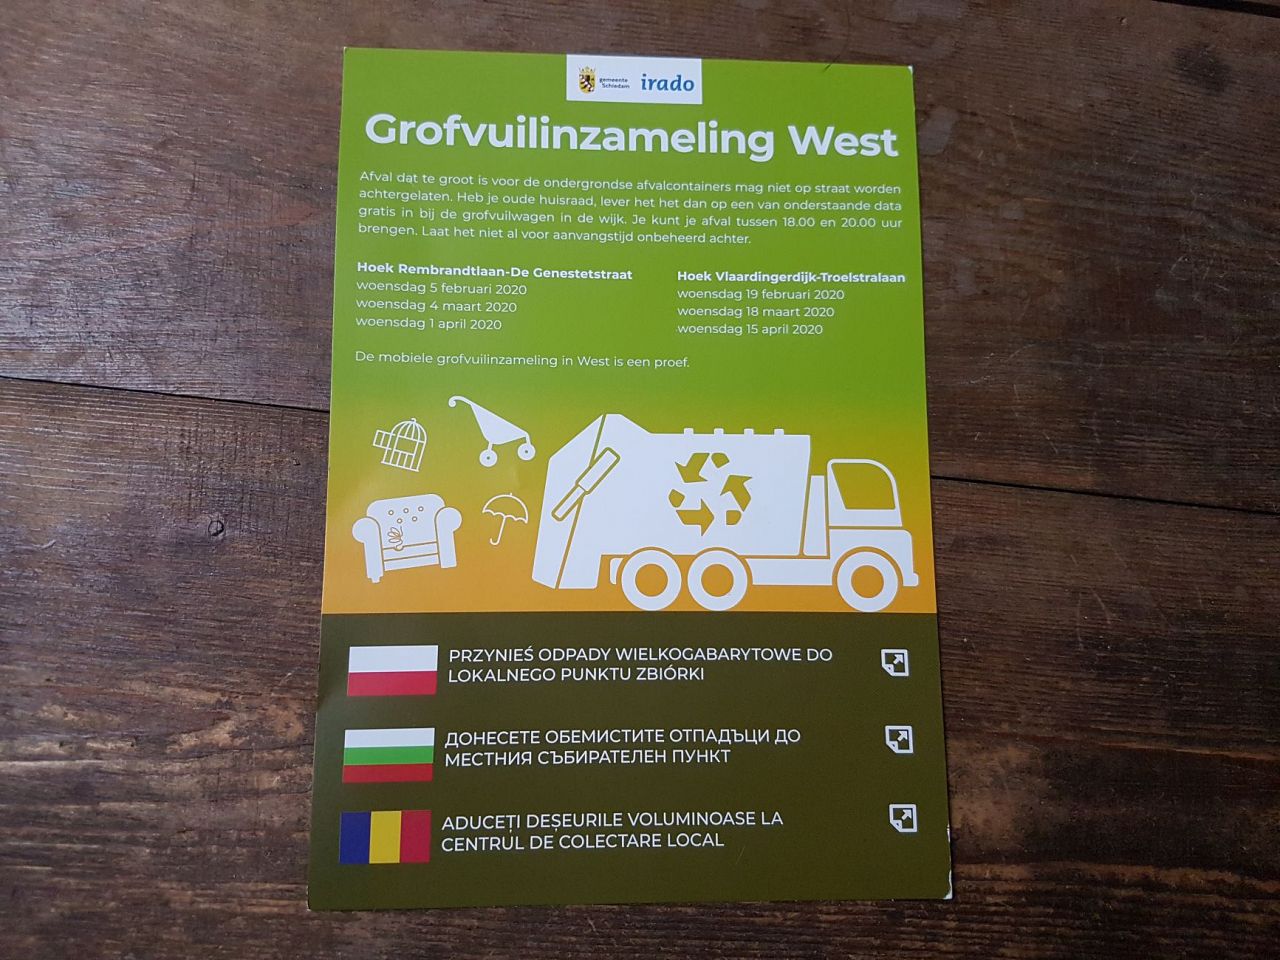 Grofvuilinzameling in west